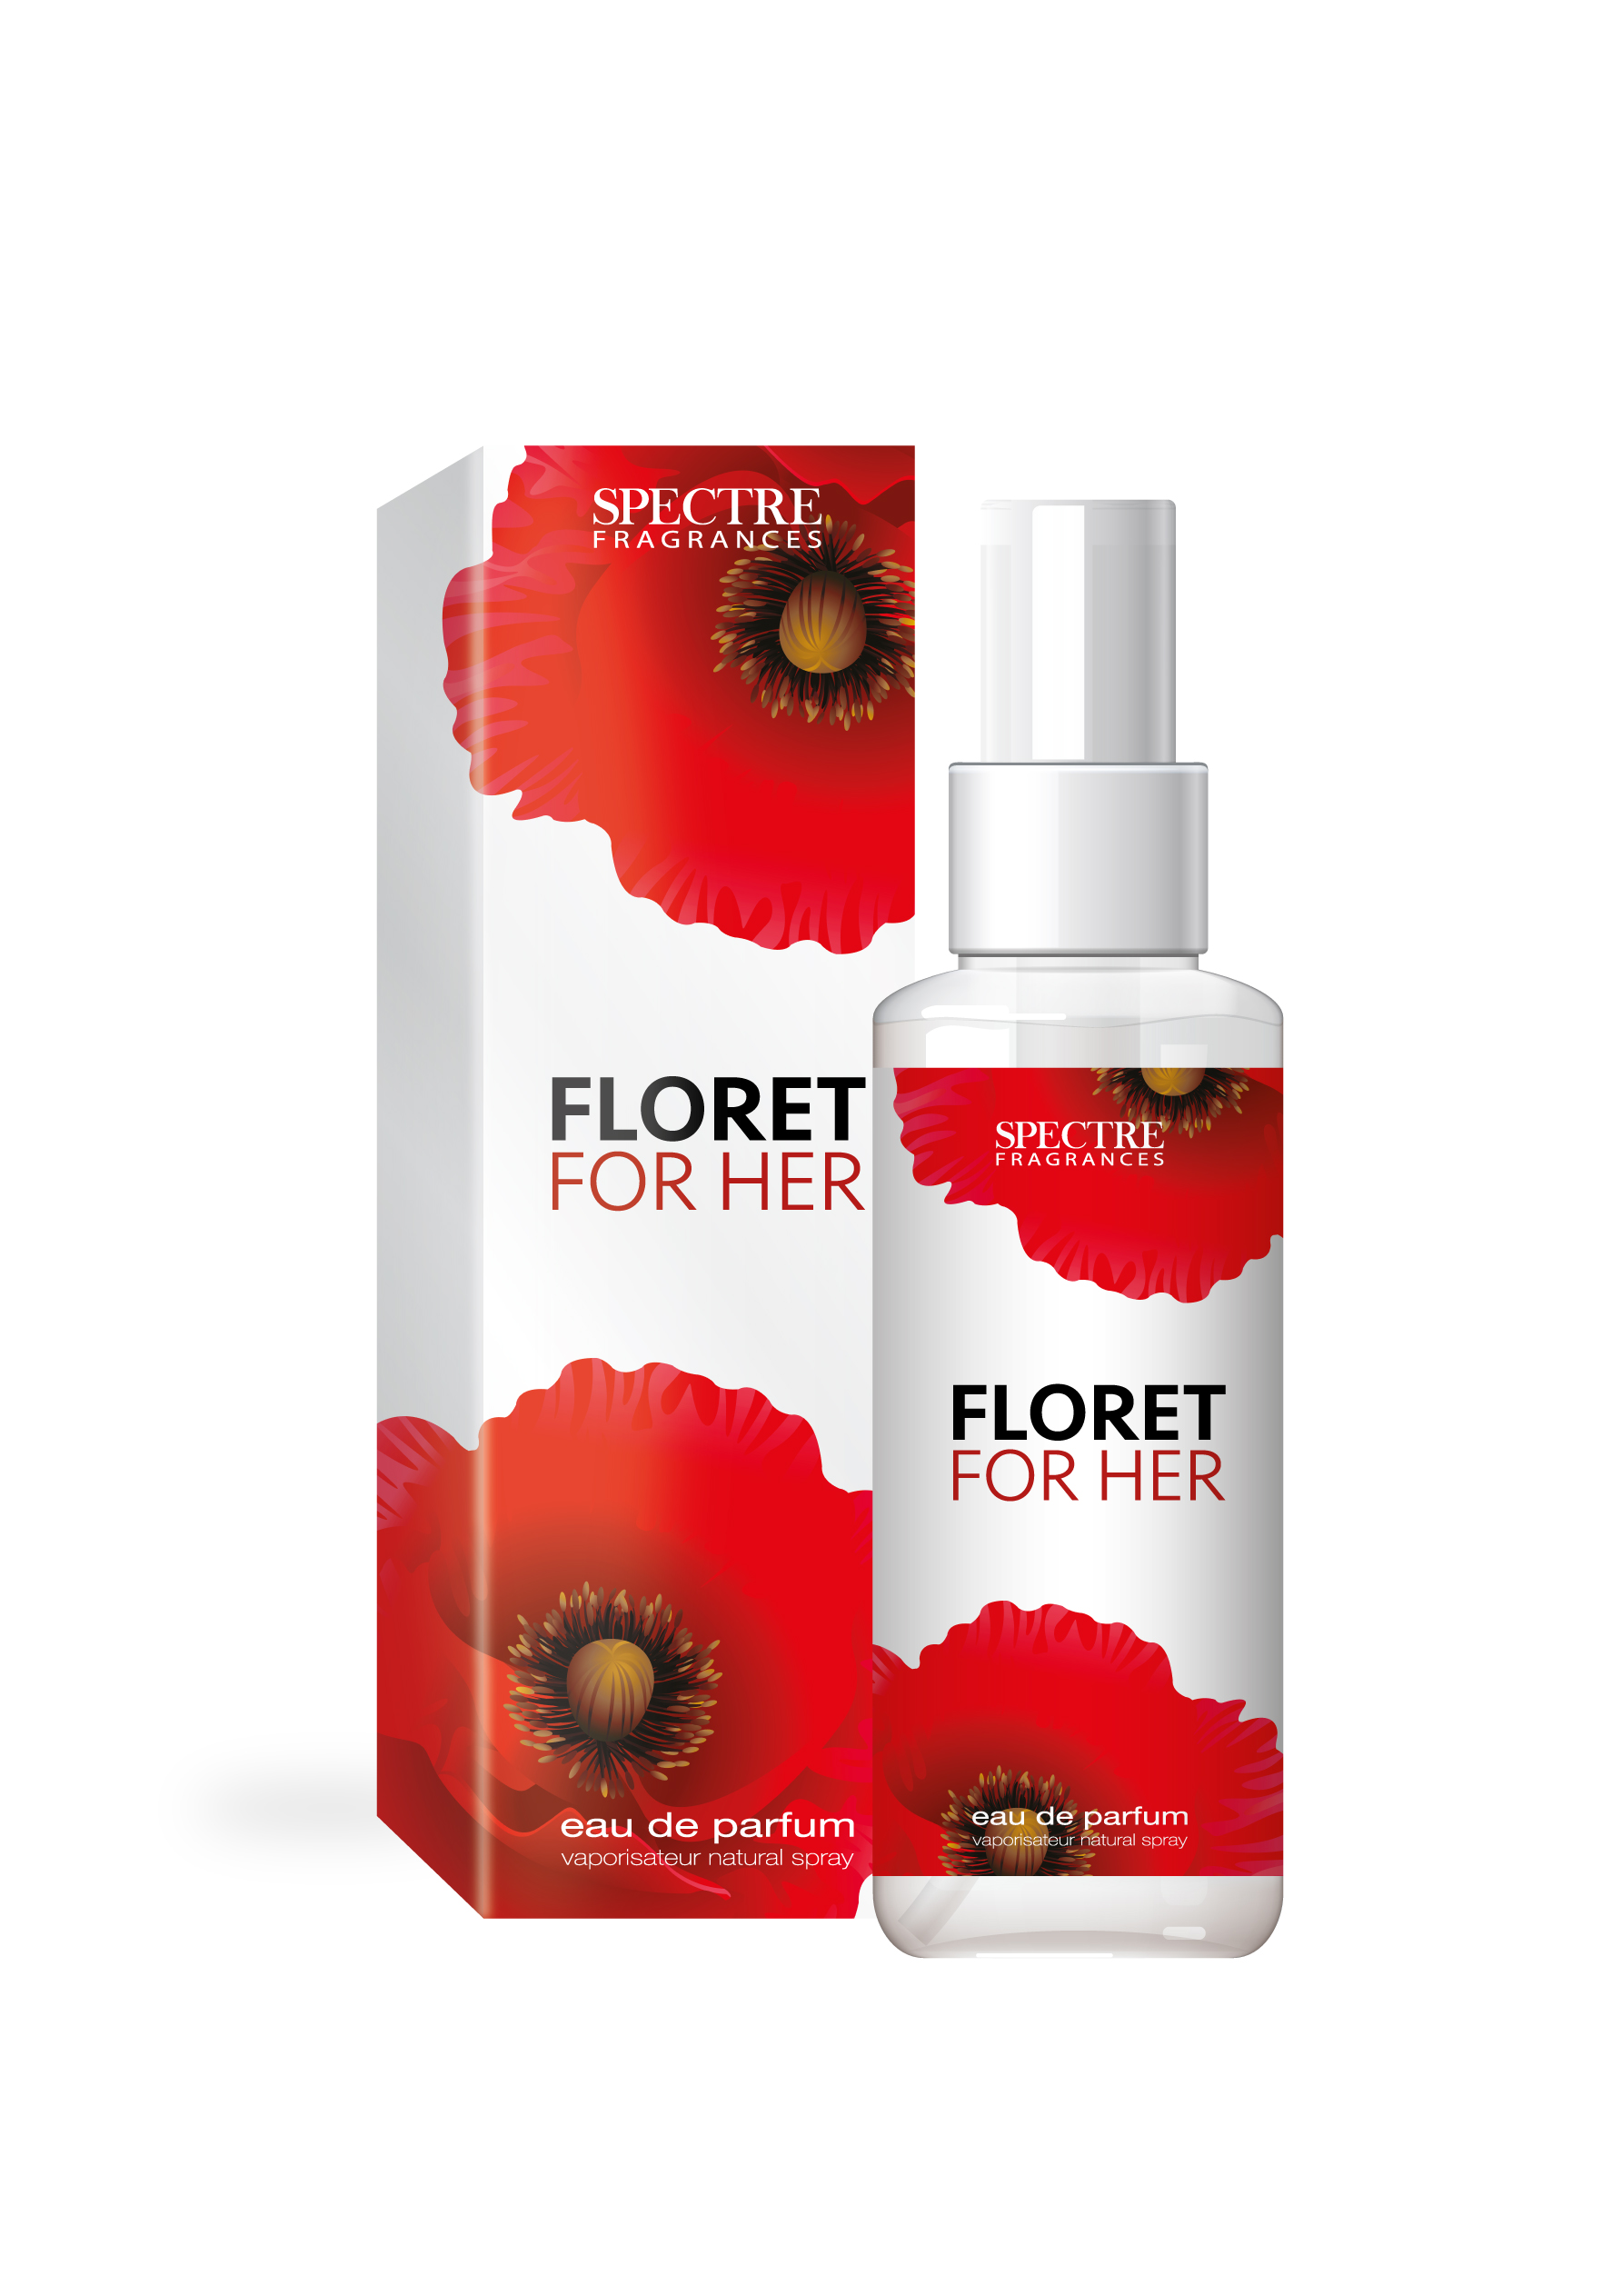 Featured image for “Floret 24st”